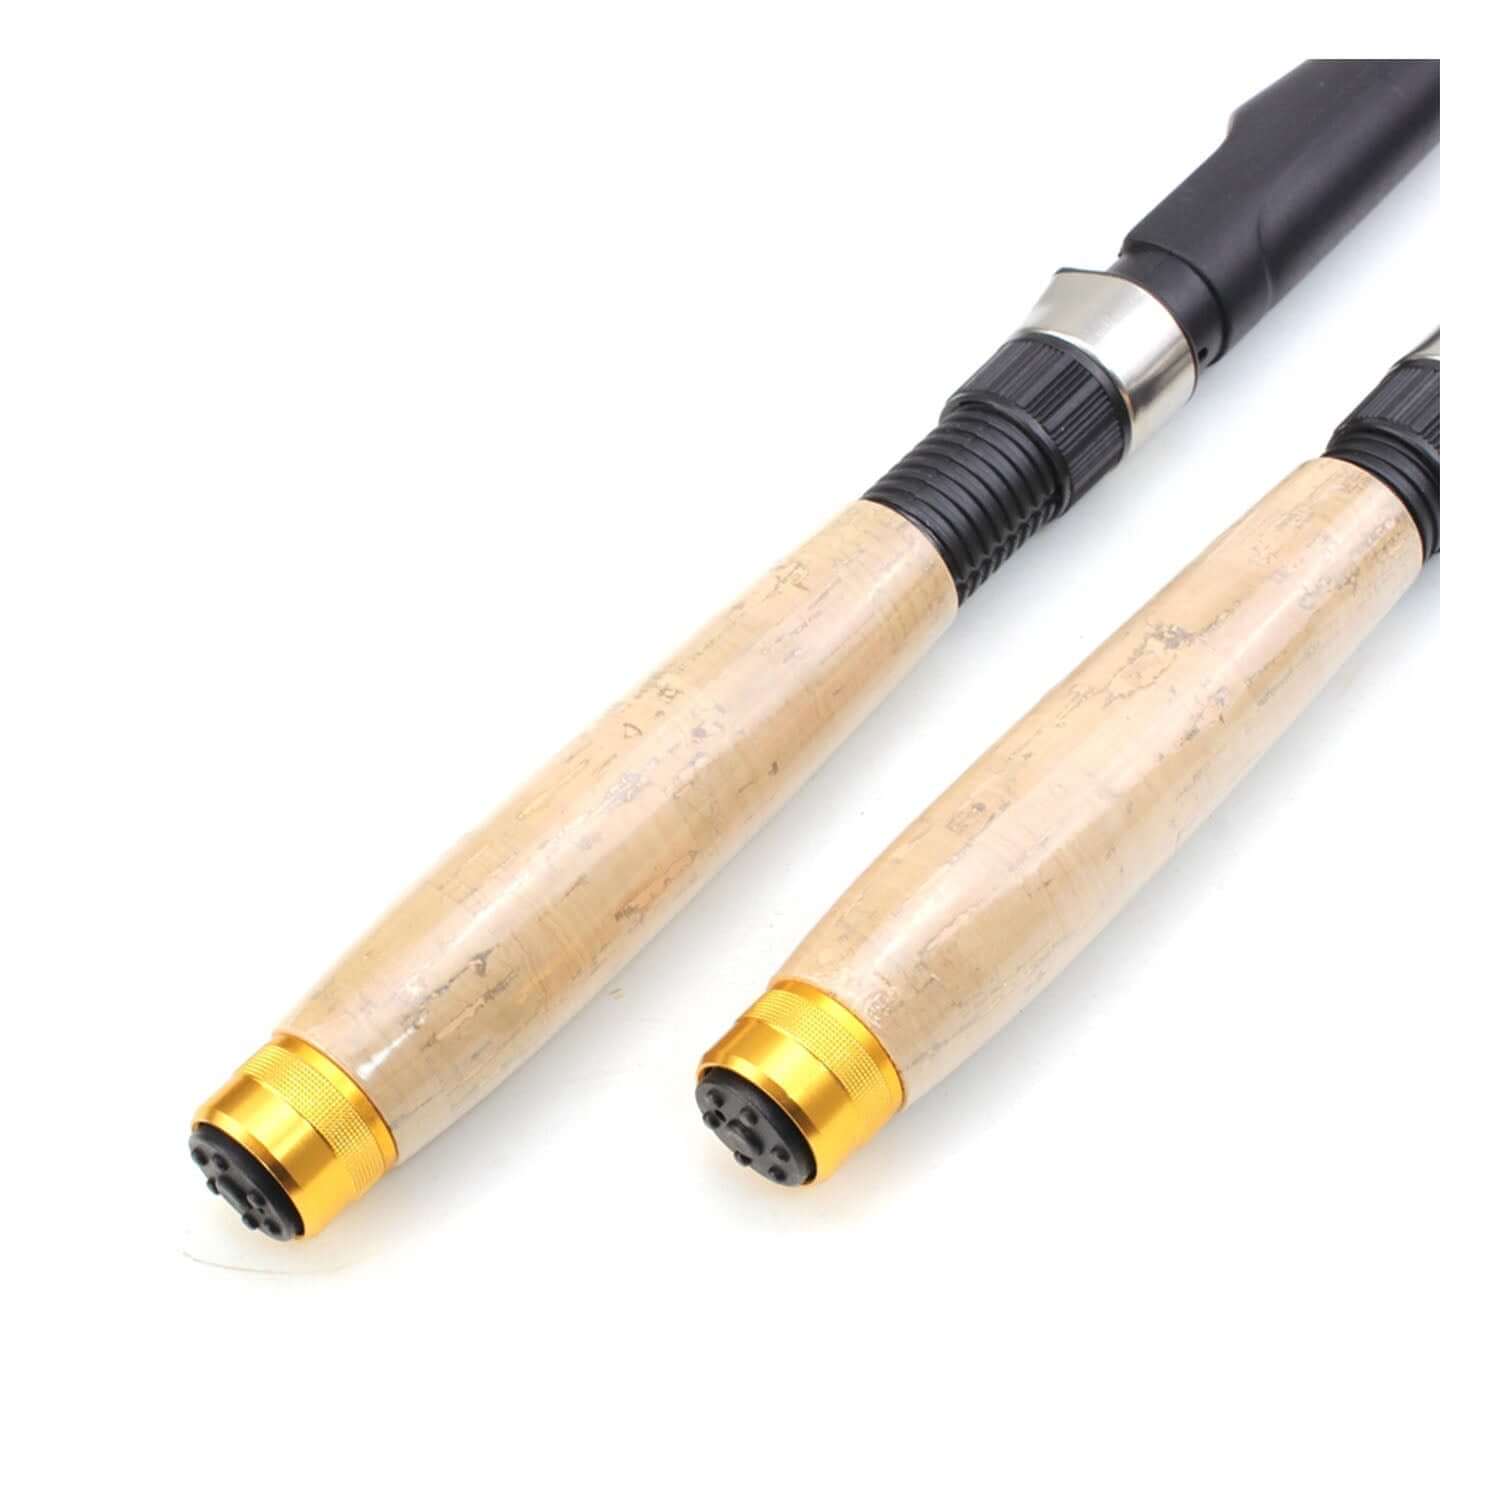 1.8m-2.7m Carbon telescopic fishing rod Extended cork handle